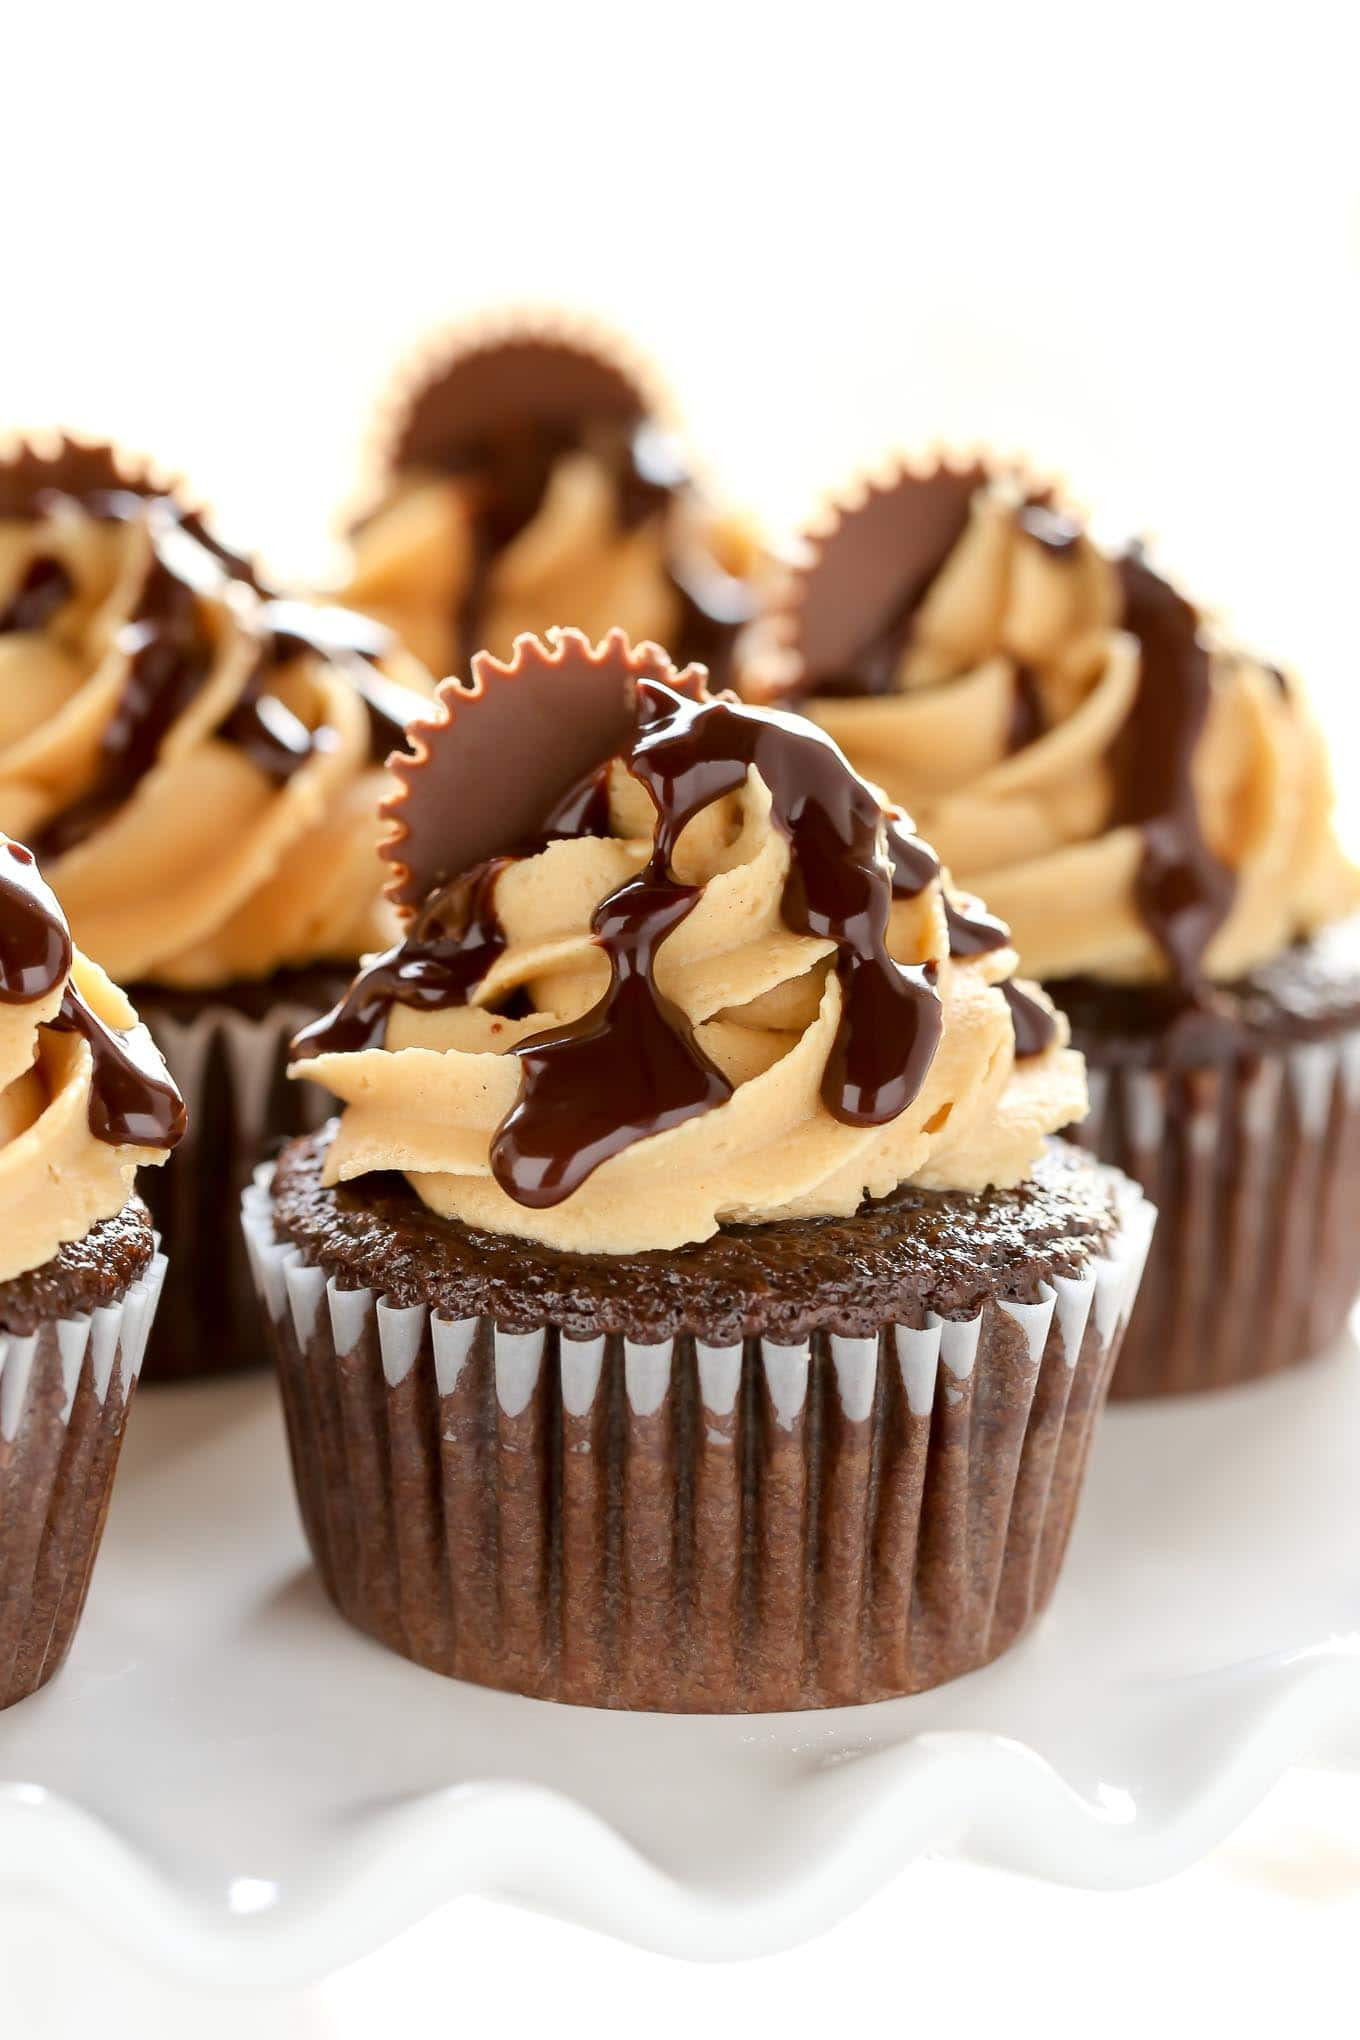 Gourmet Chocolate Cupcakes Recipe
 Chocolate Cupcakes with Peanut Butter Frosting